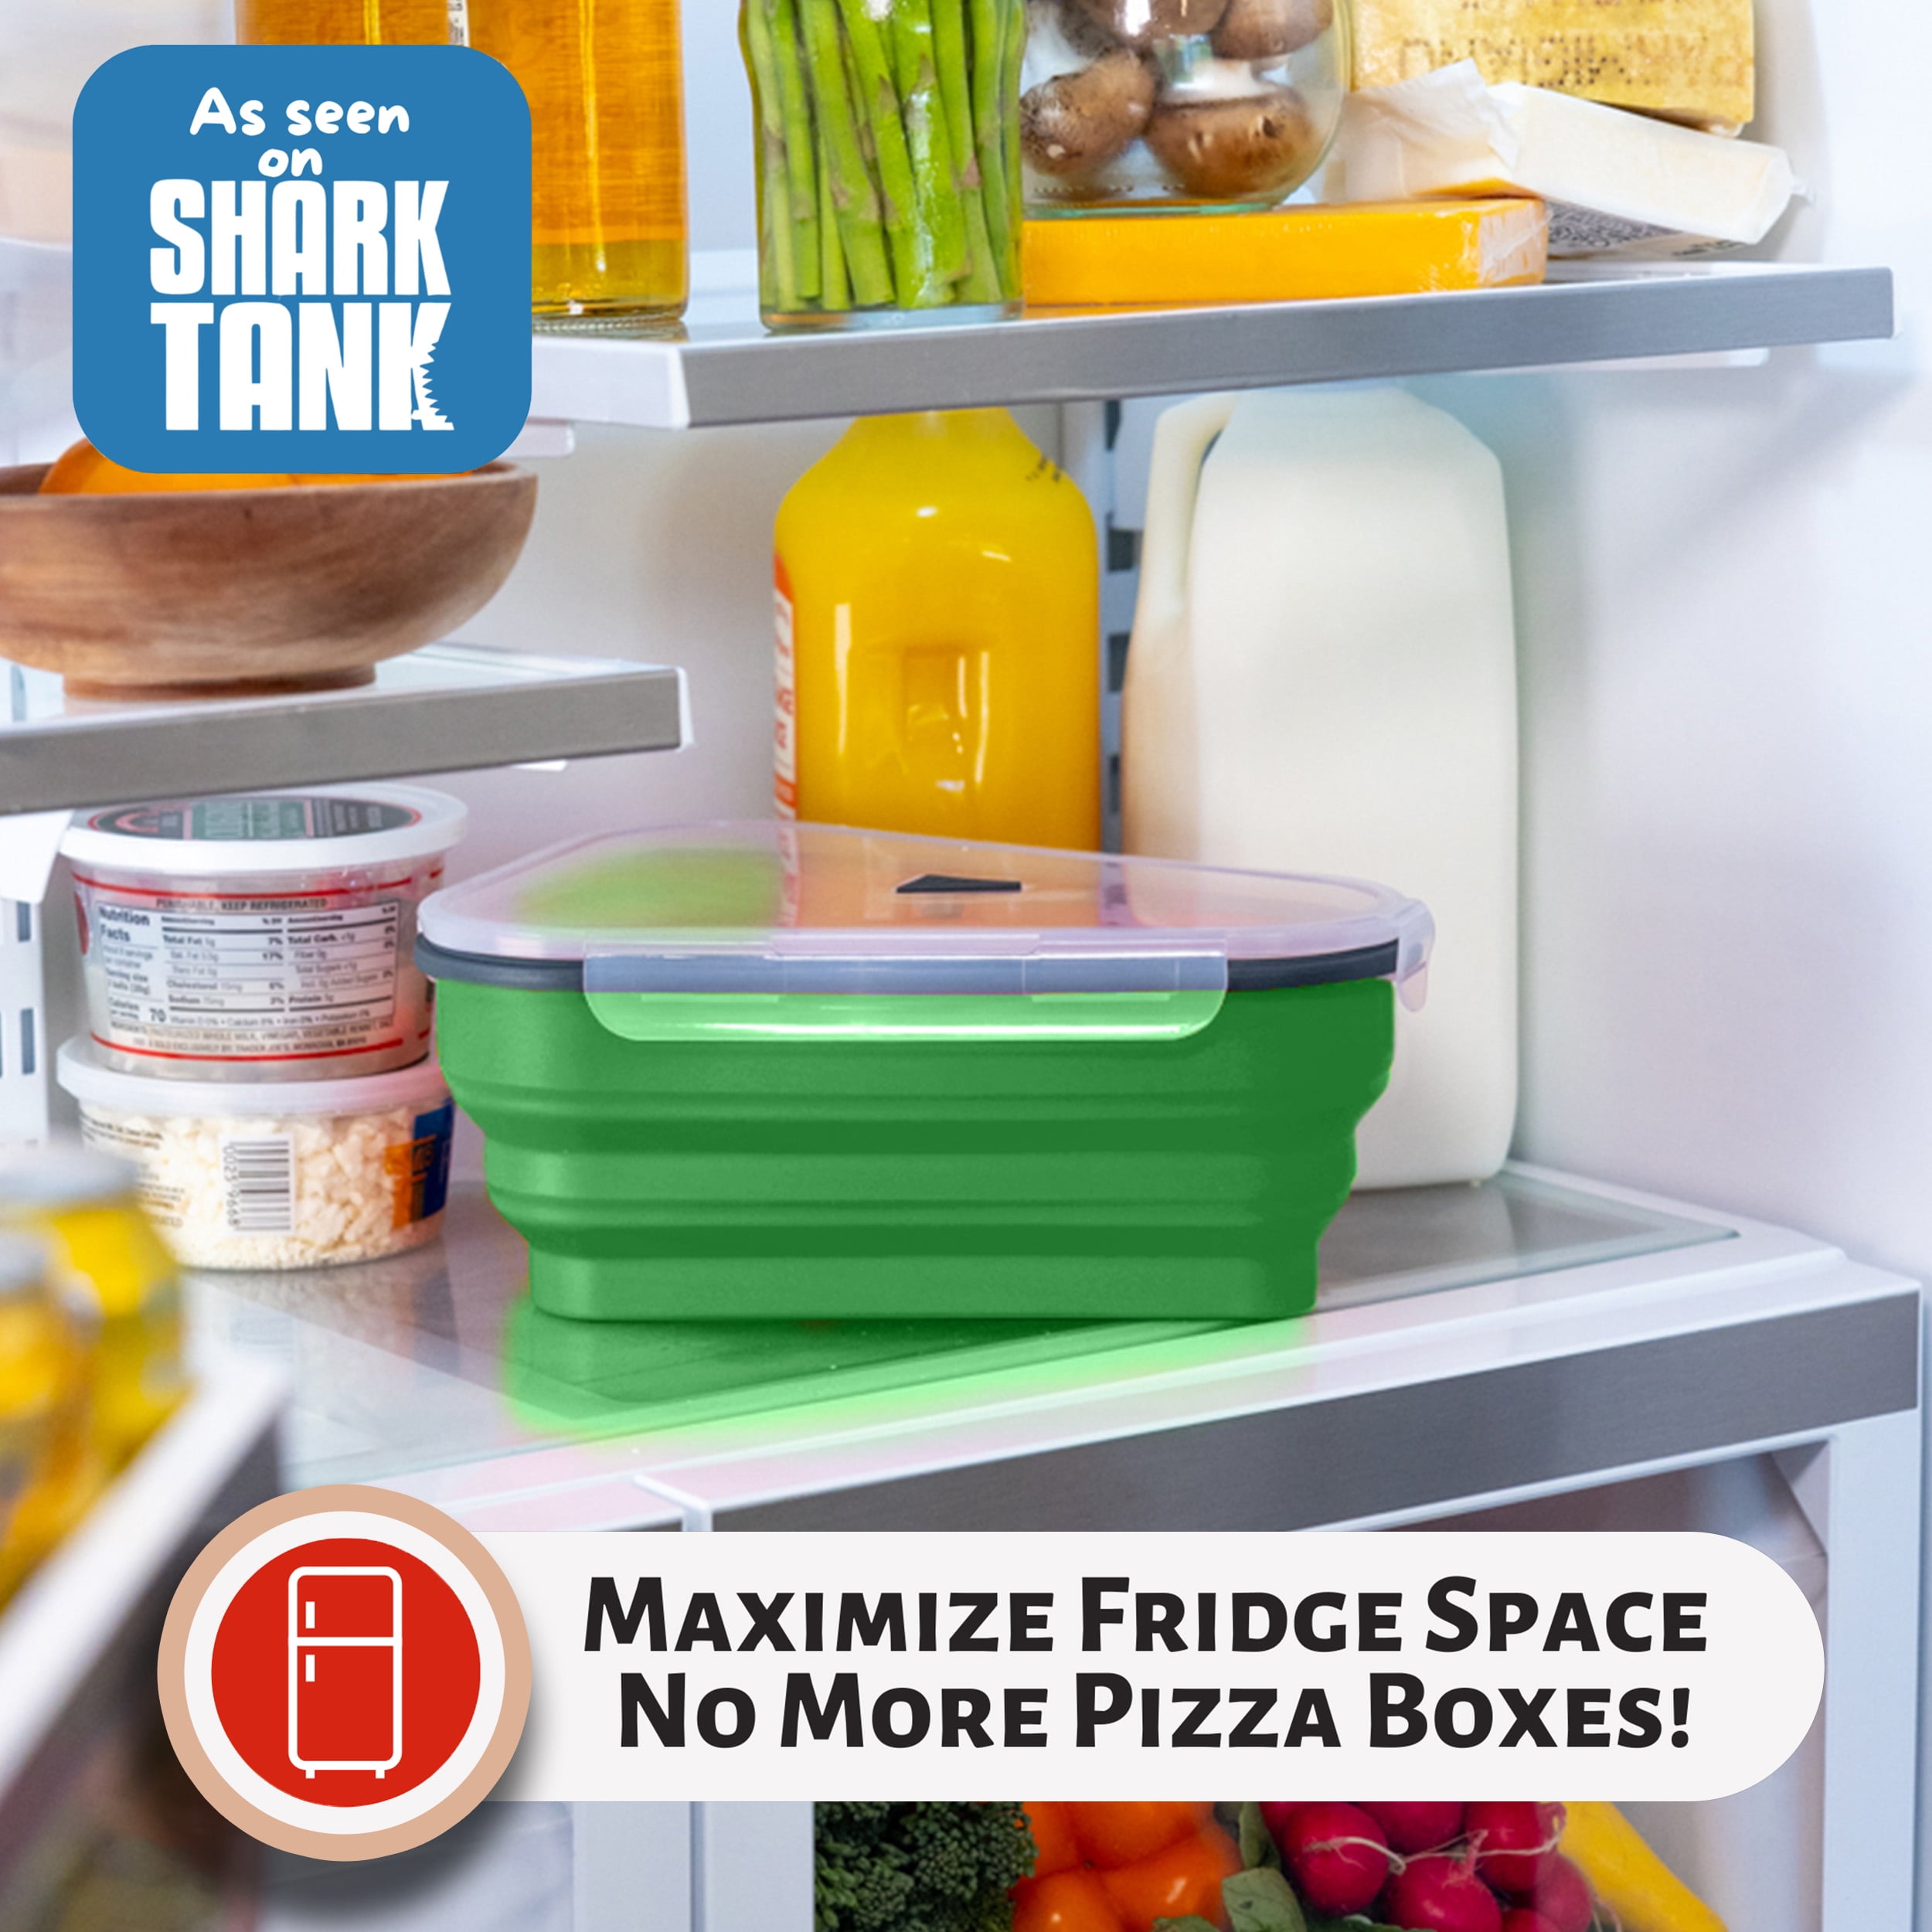 sash apex pizza storage container collapsible - reusable pizza container  with 5 microwave trays